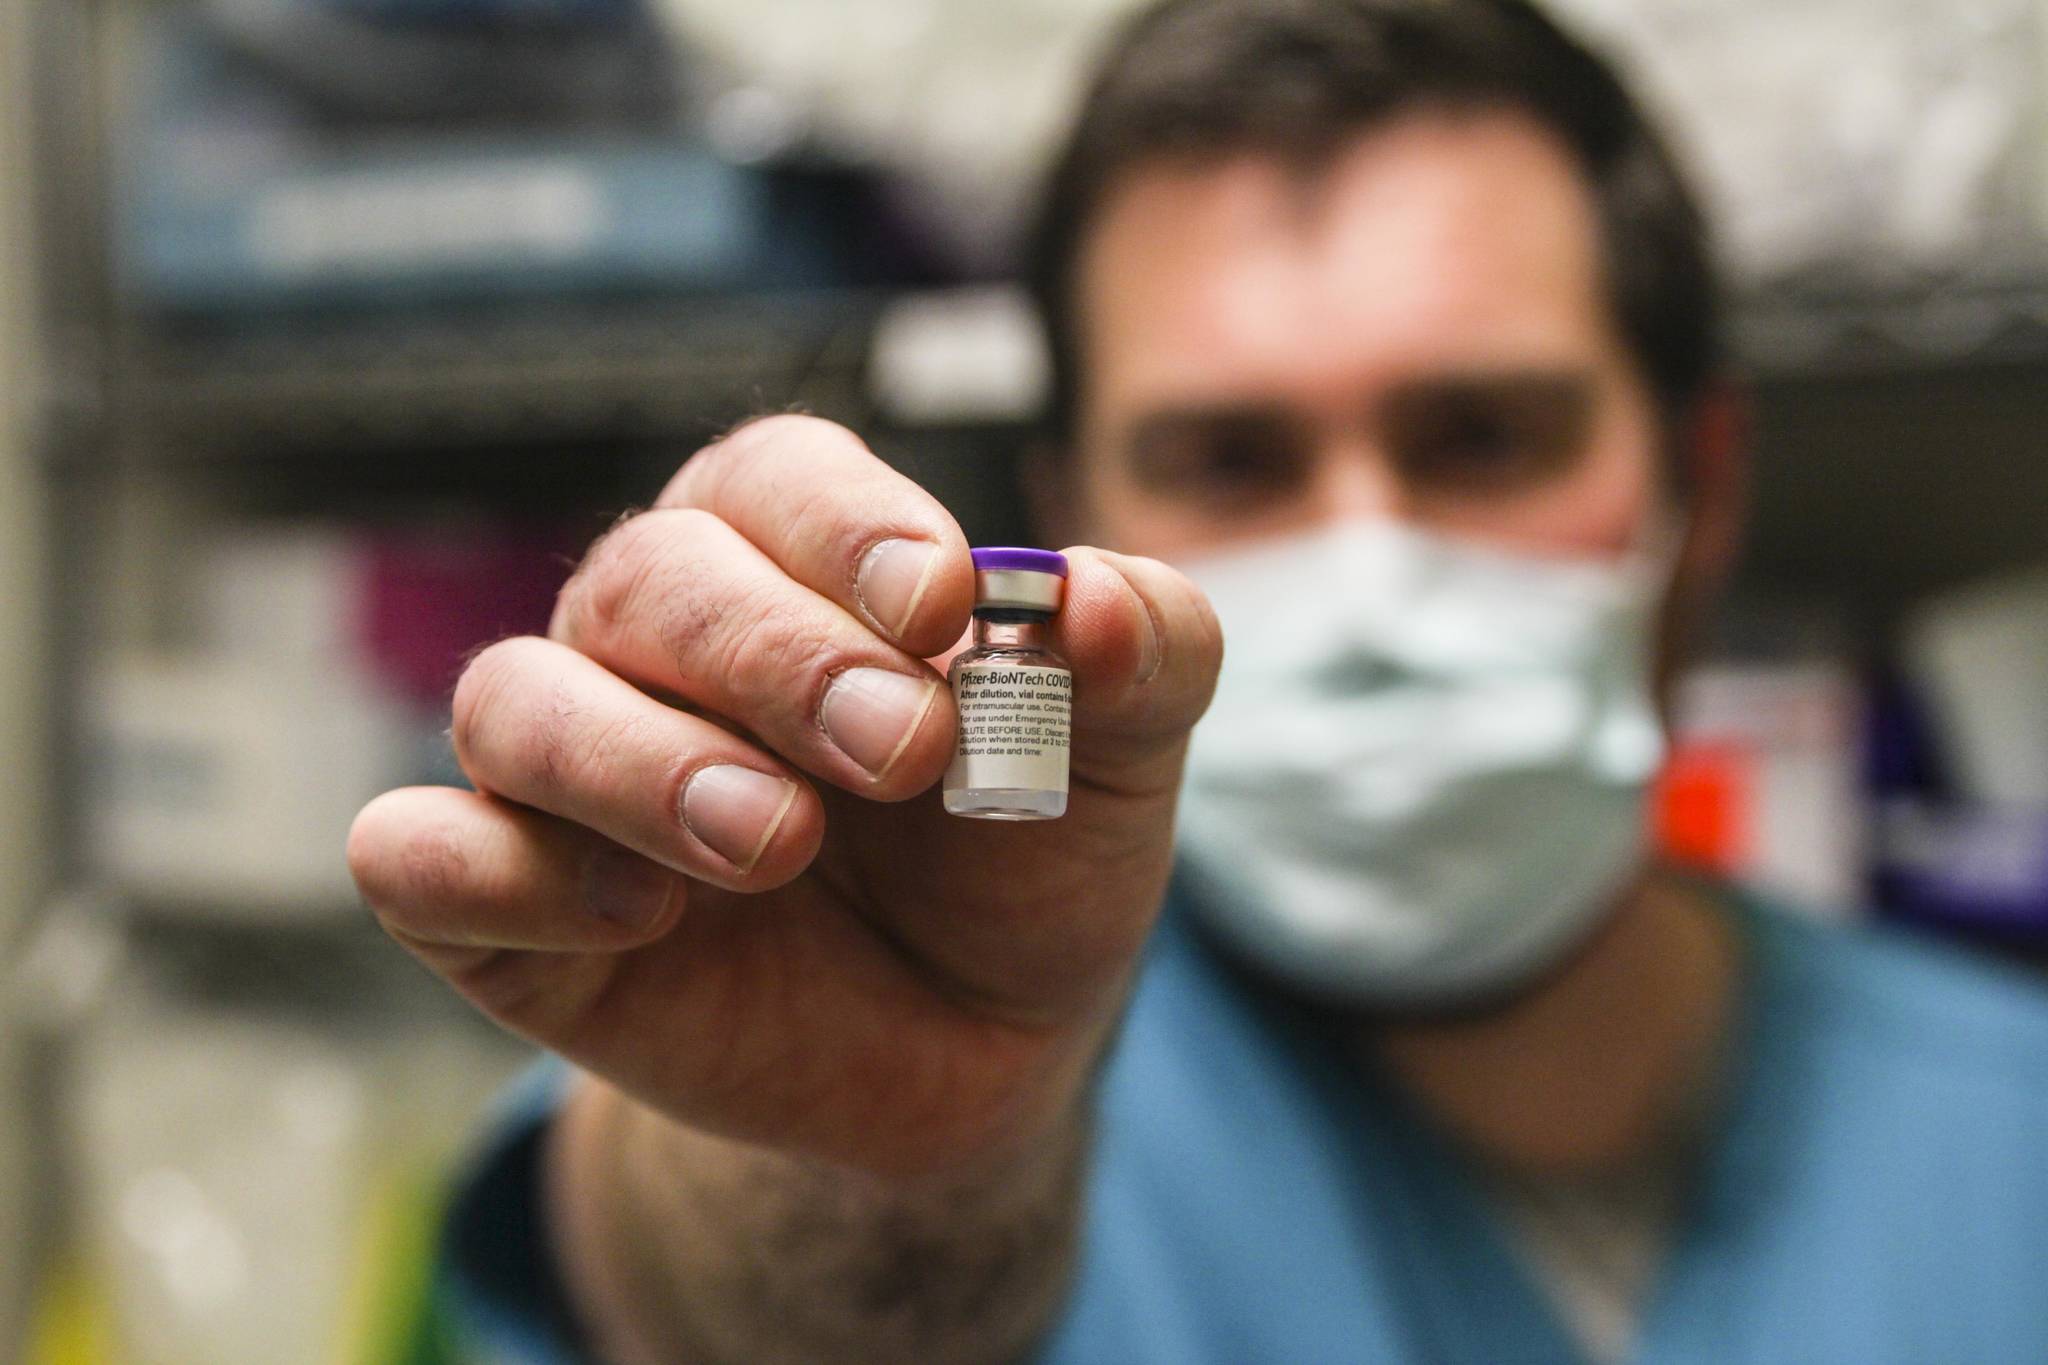 Bartlett Regional Hospital pharmacist Chris Sperry holds a vial of COVID-19 vaccine on Dec. 15, 2020. BRH immediately began vaccinating its personnel upon receipt of the vaccine. More doses are expected to arrive in the state this month. (Michael S. Lockett / Juneau Empire)